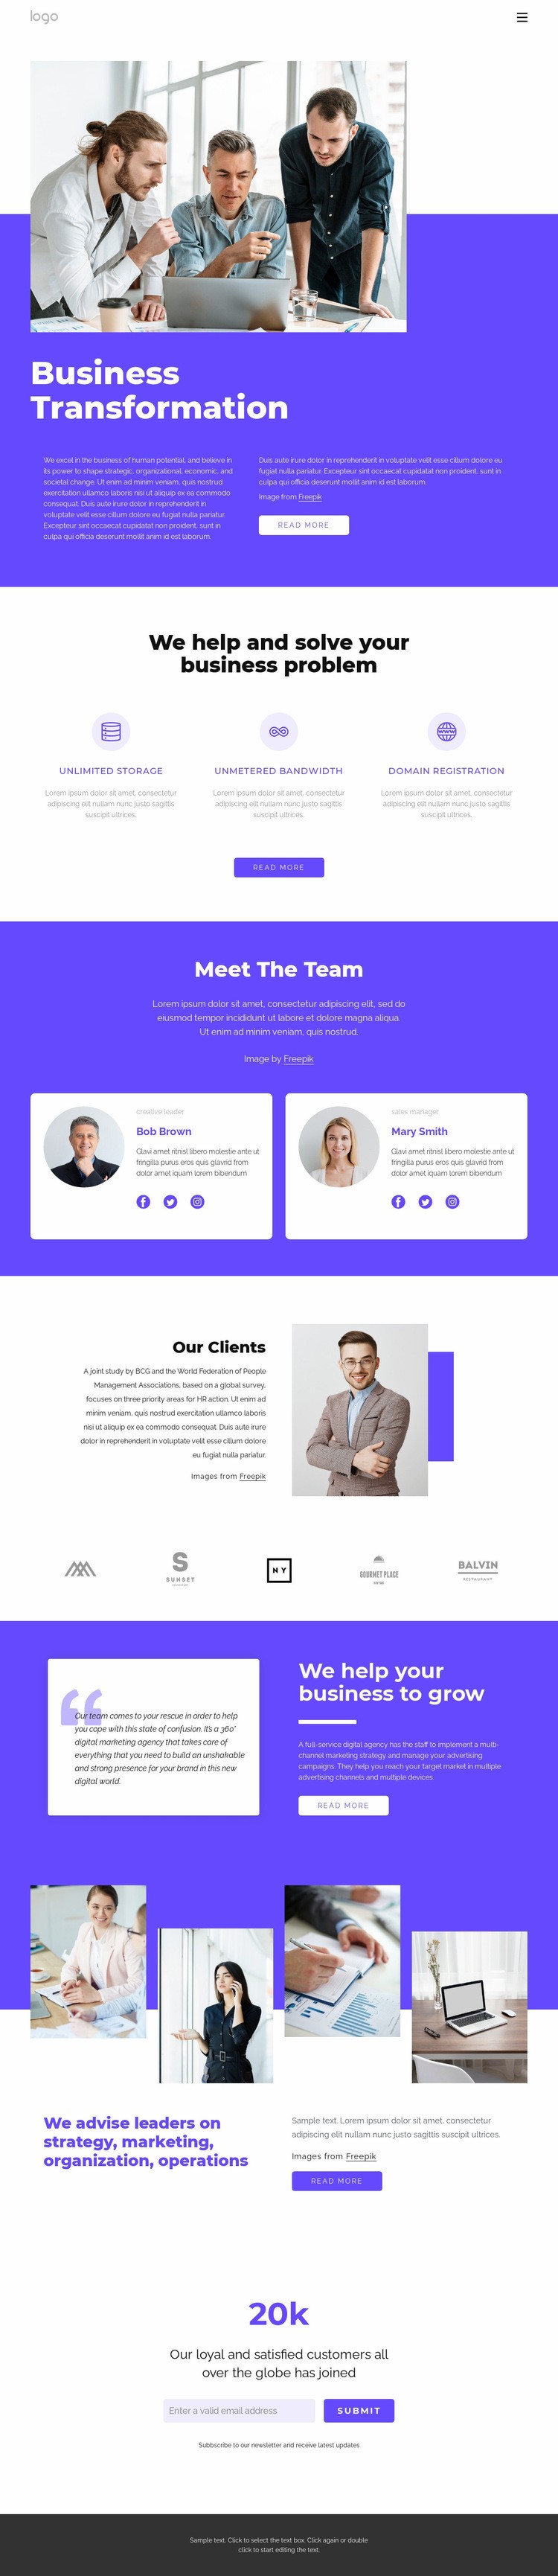 Global management consulting firm Homepage Design